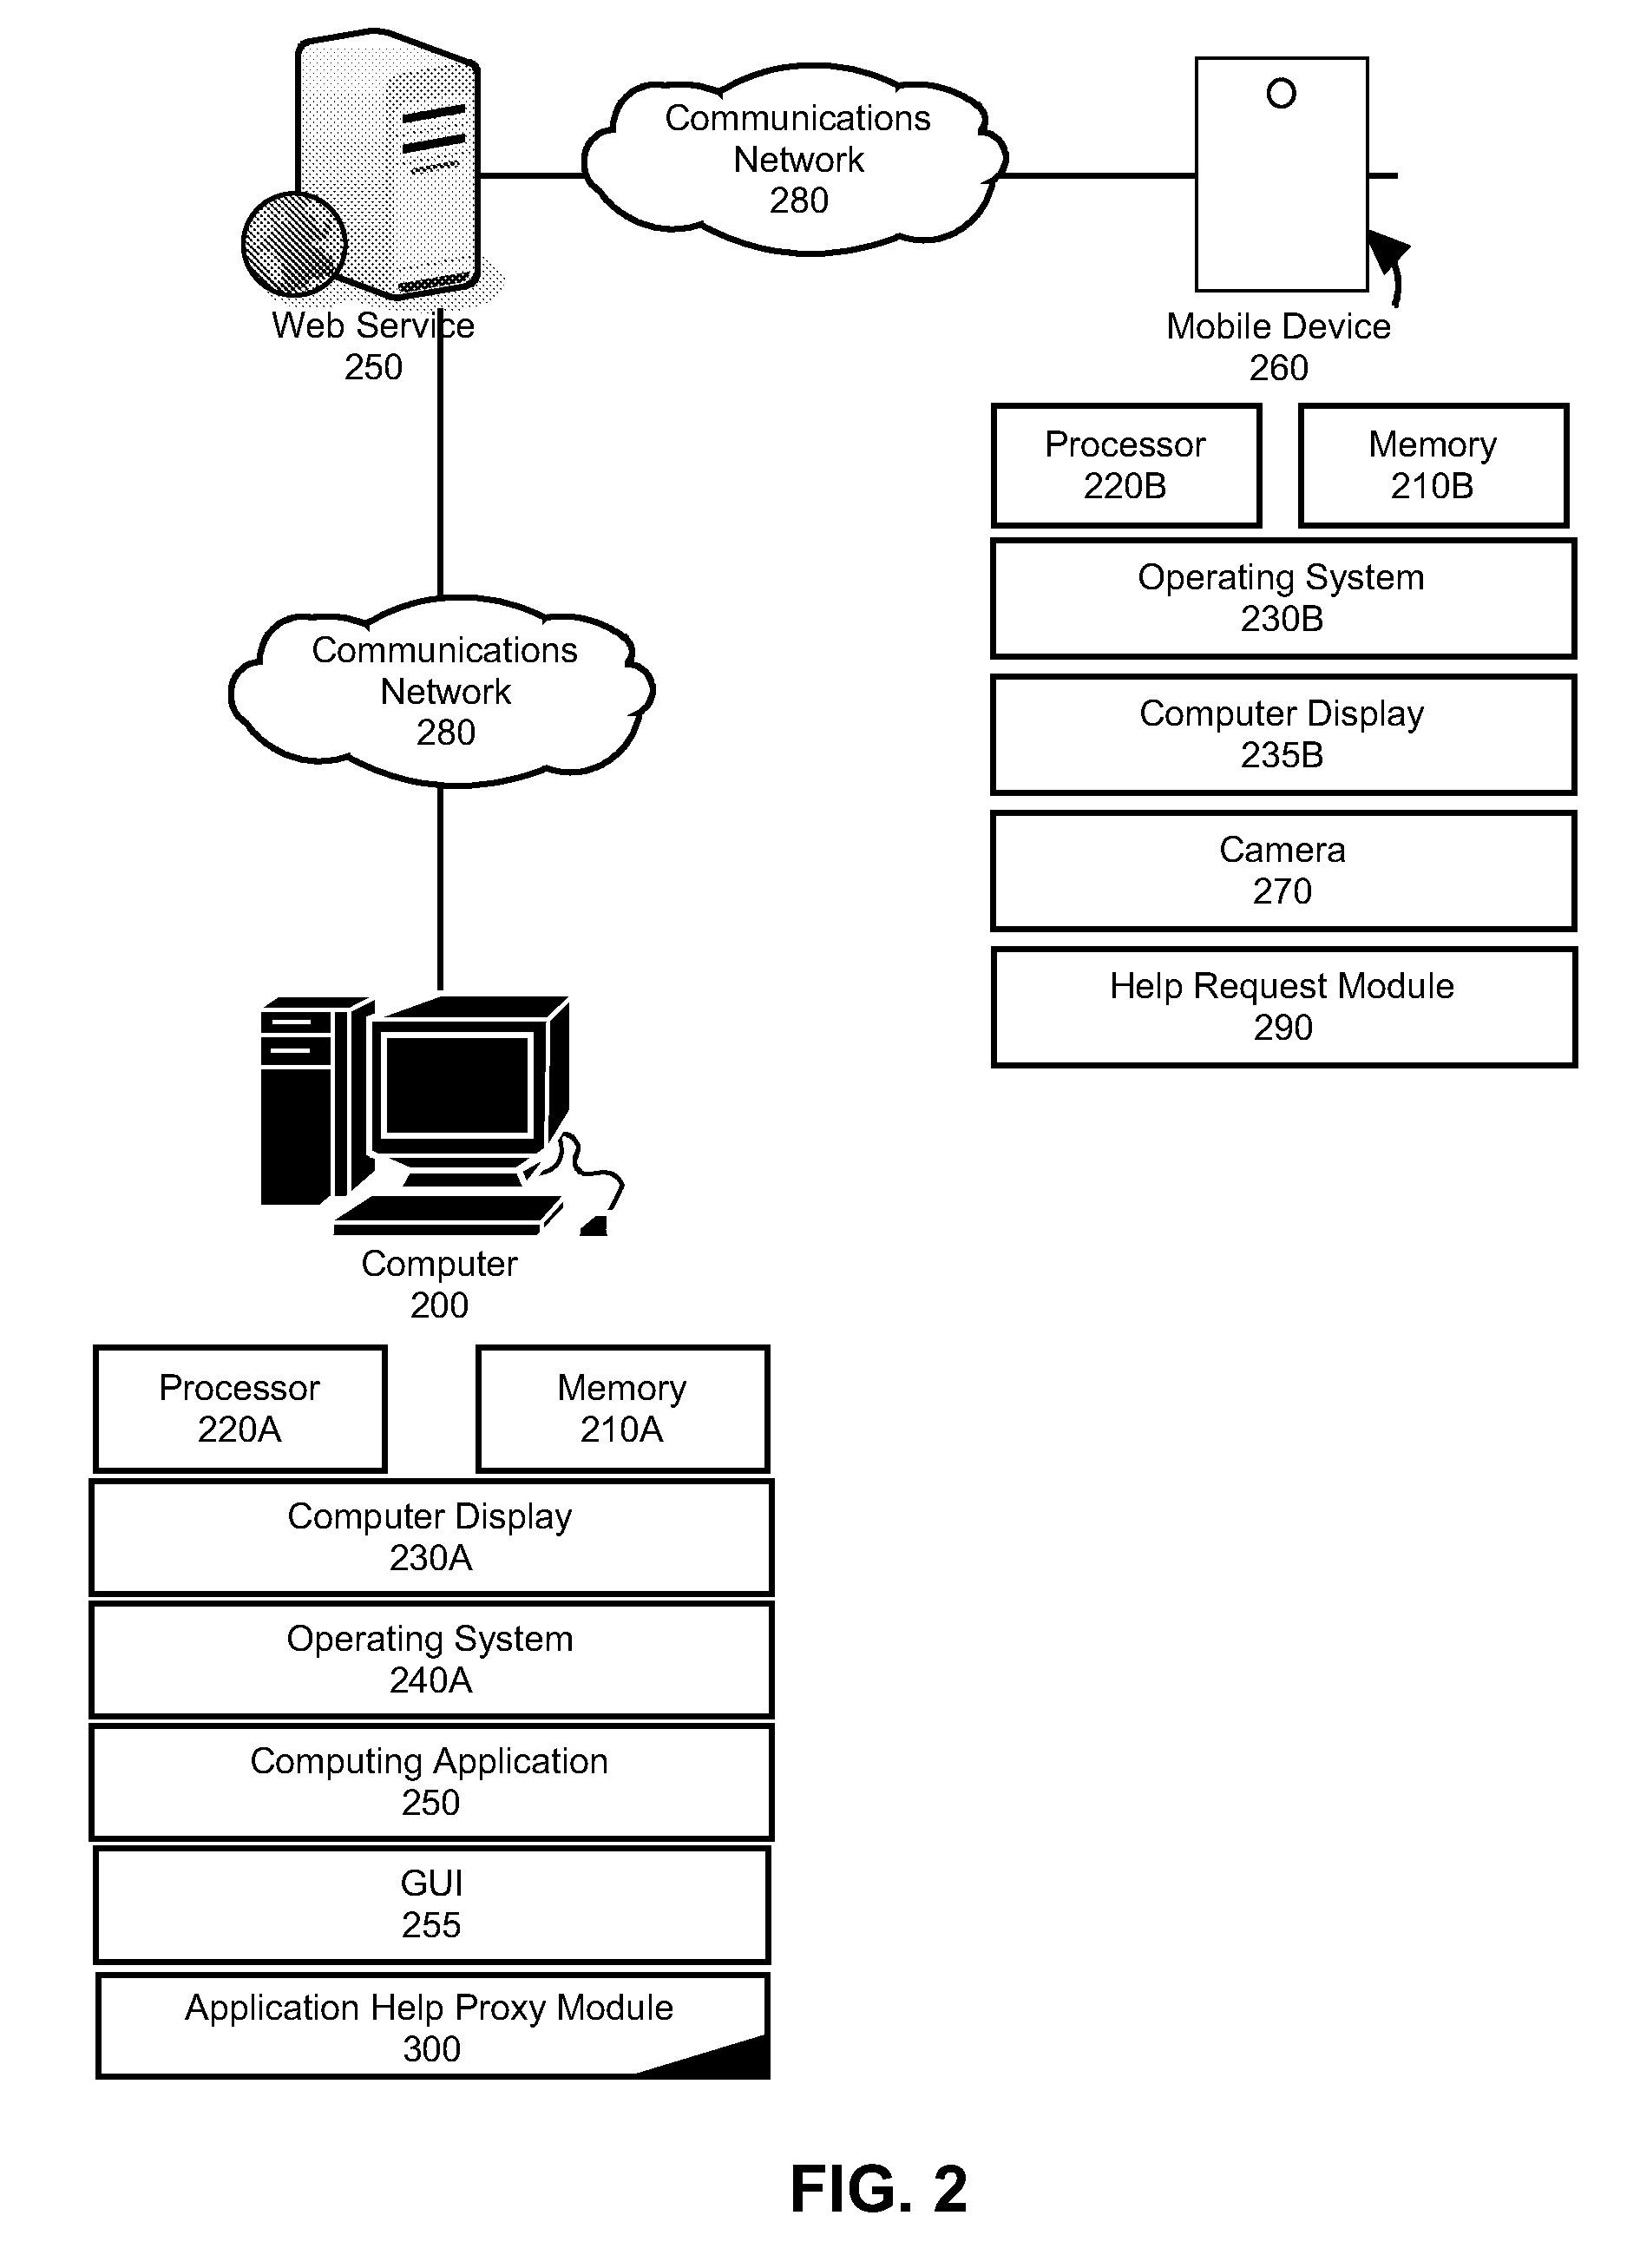 System to overlay application help on a mobile device